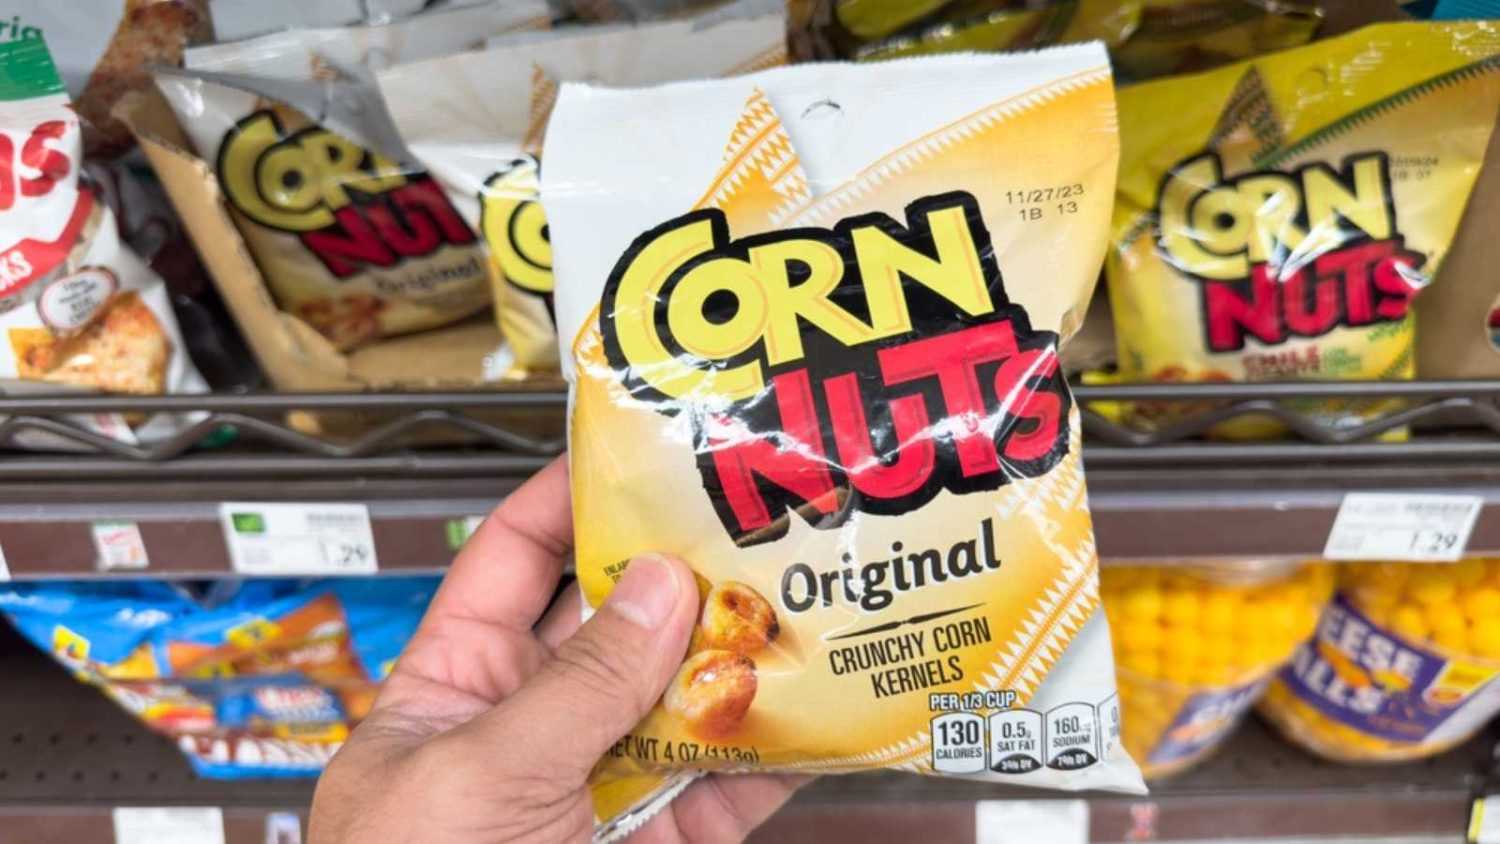 Los Angeles, California, United States - 05-05-2023: A view of a hand holding a package of Corn Nuts Original, on display at a local grocery store.